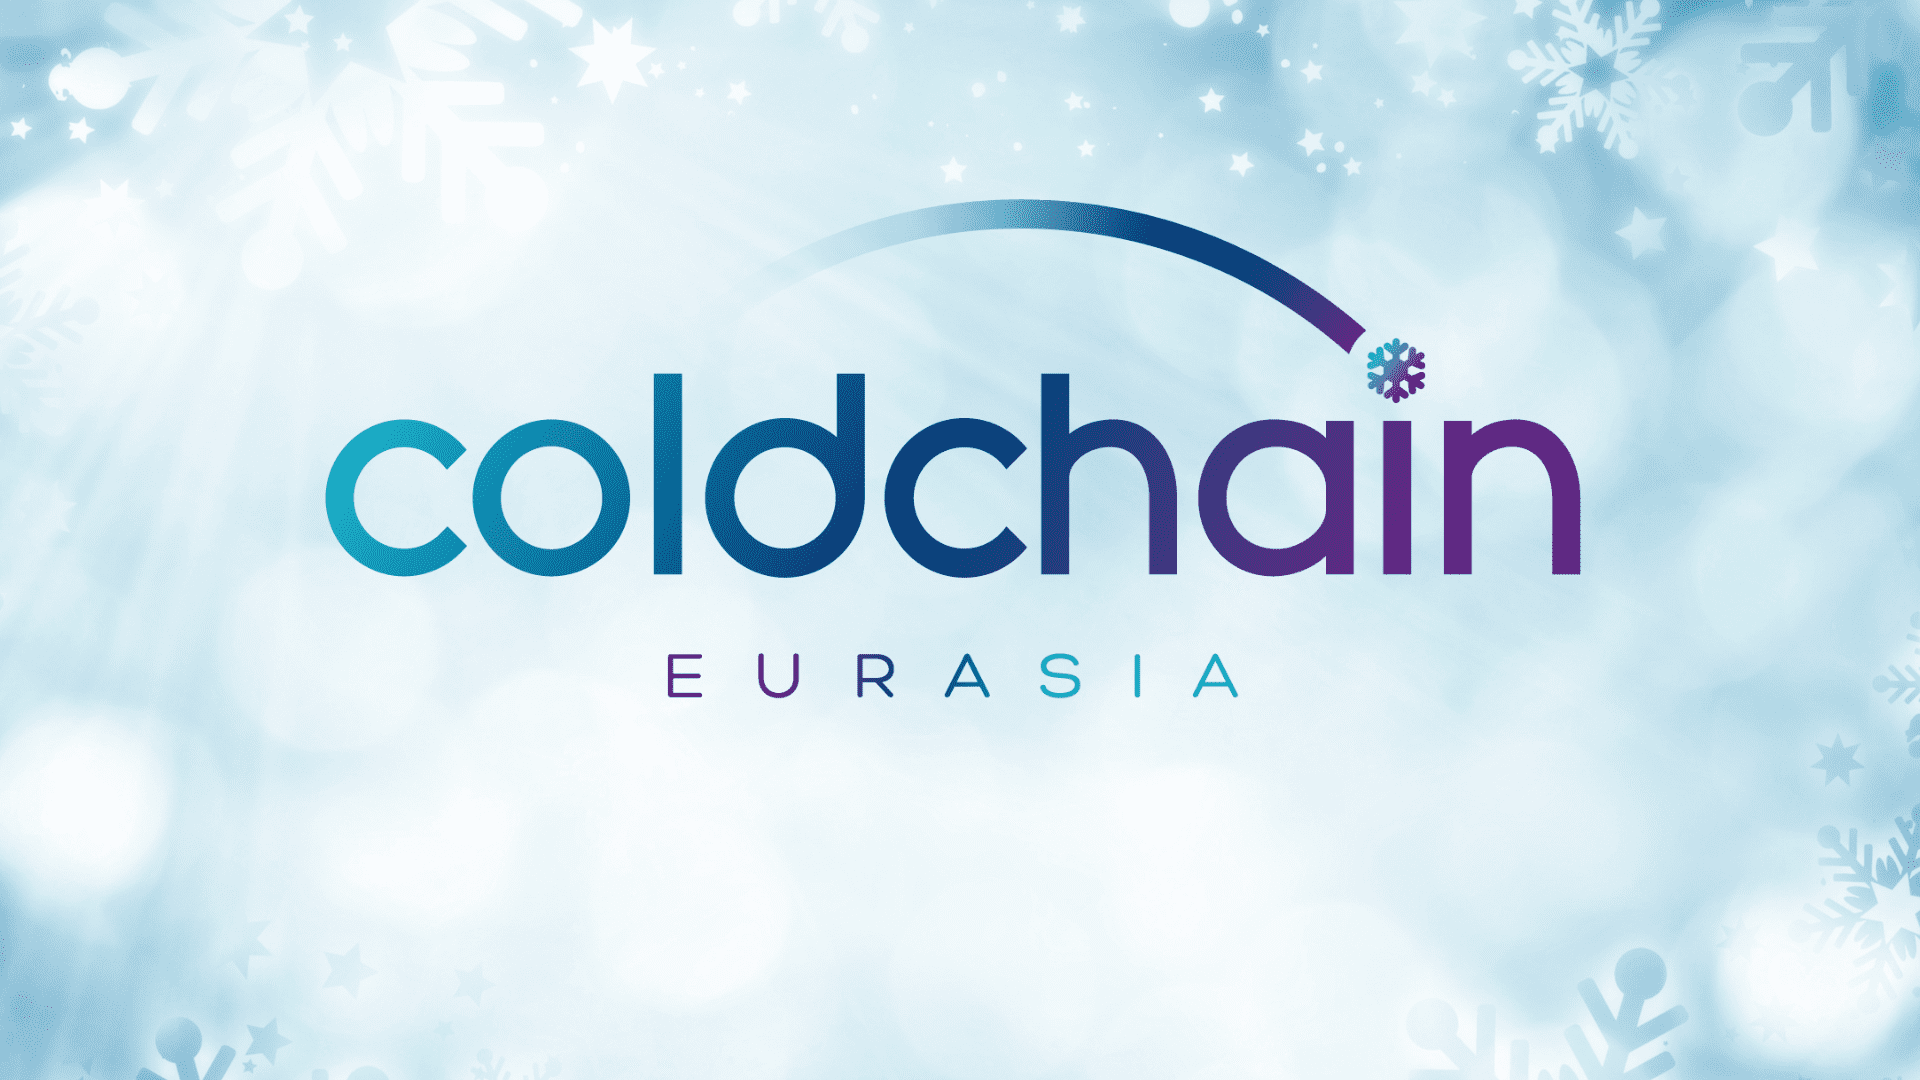 Coldchain Eurasia Conference: New Horizons in Food Logistics